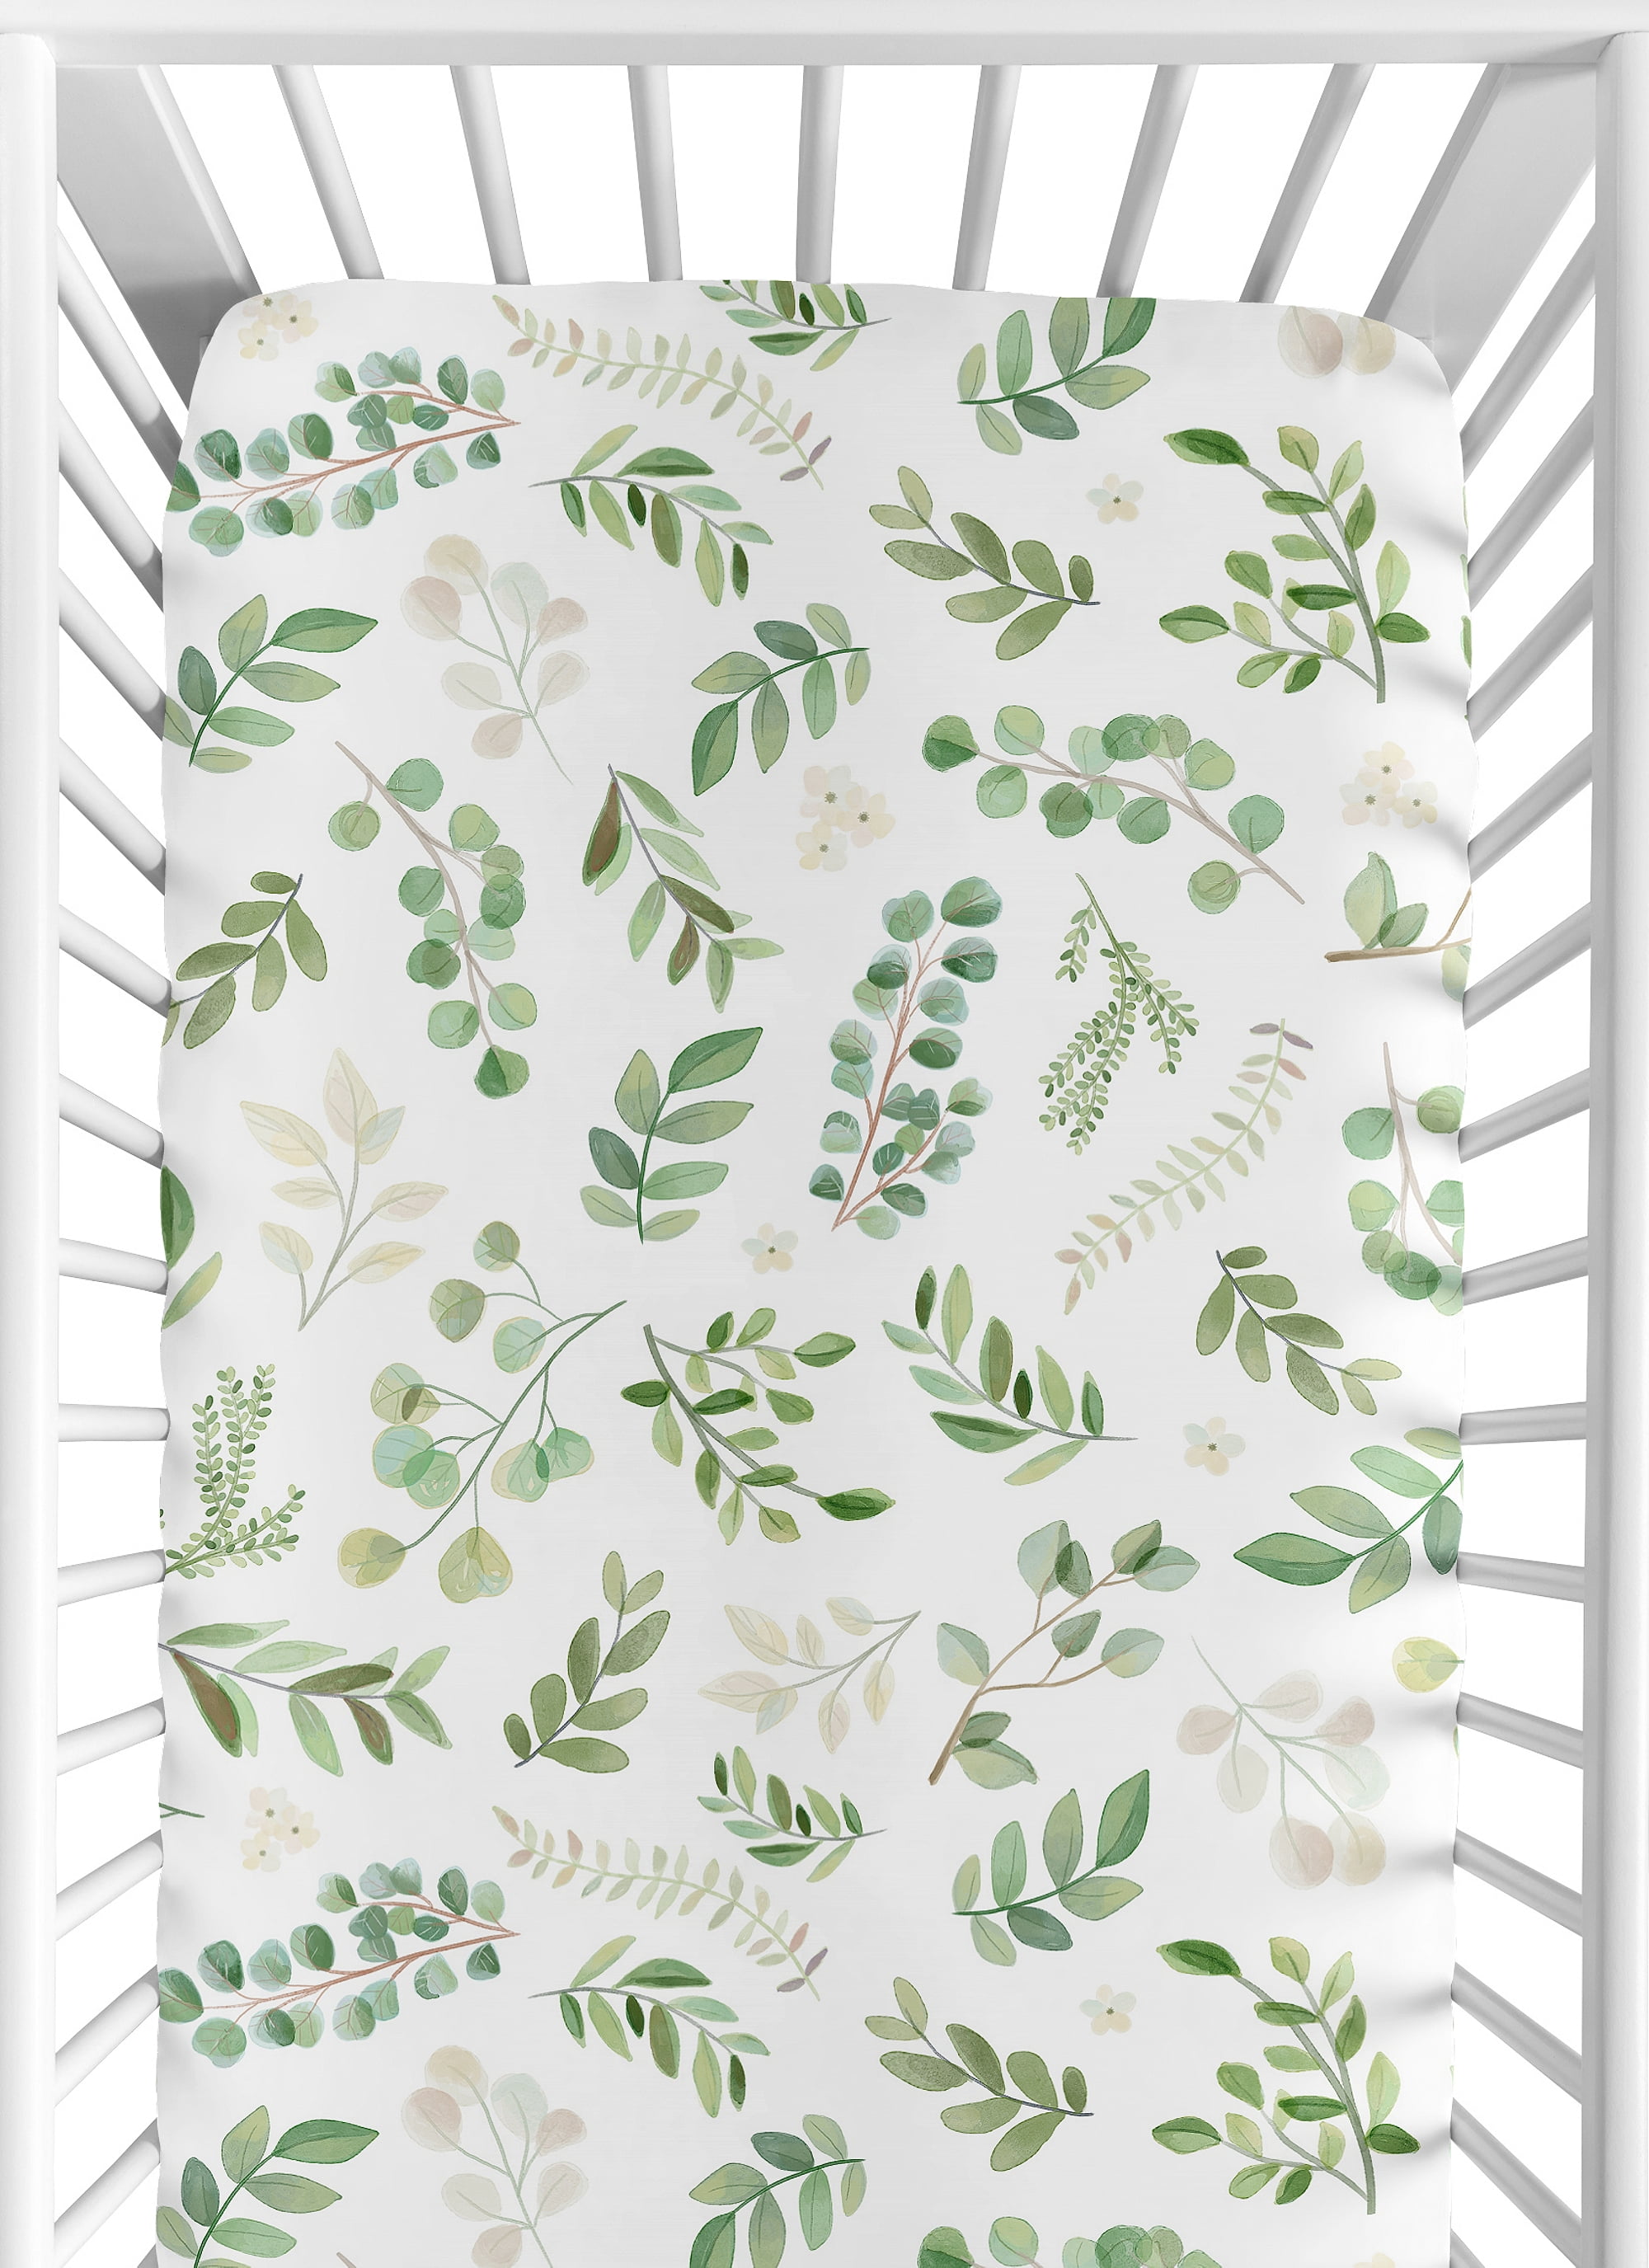 Sweet Jojo Designs Floral Leaf Girl Fitted Crib Sheet Baby or Toddler Bed  Nursery Green and White Boho Watercolor Botanical Woodland Tropical  Garden